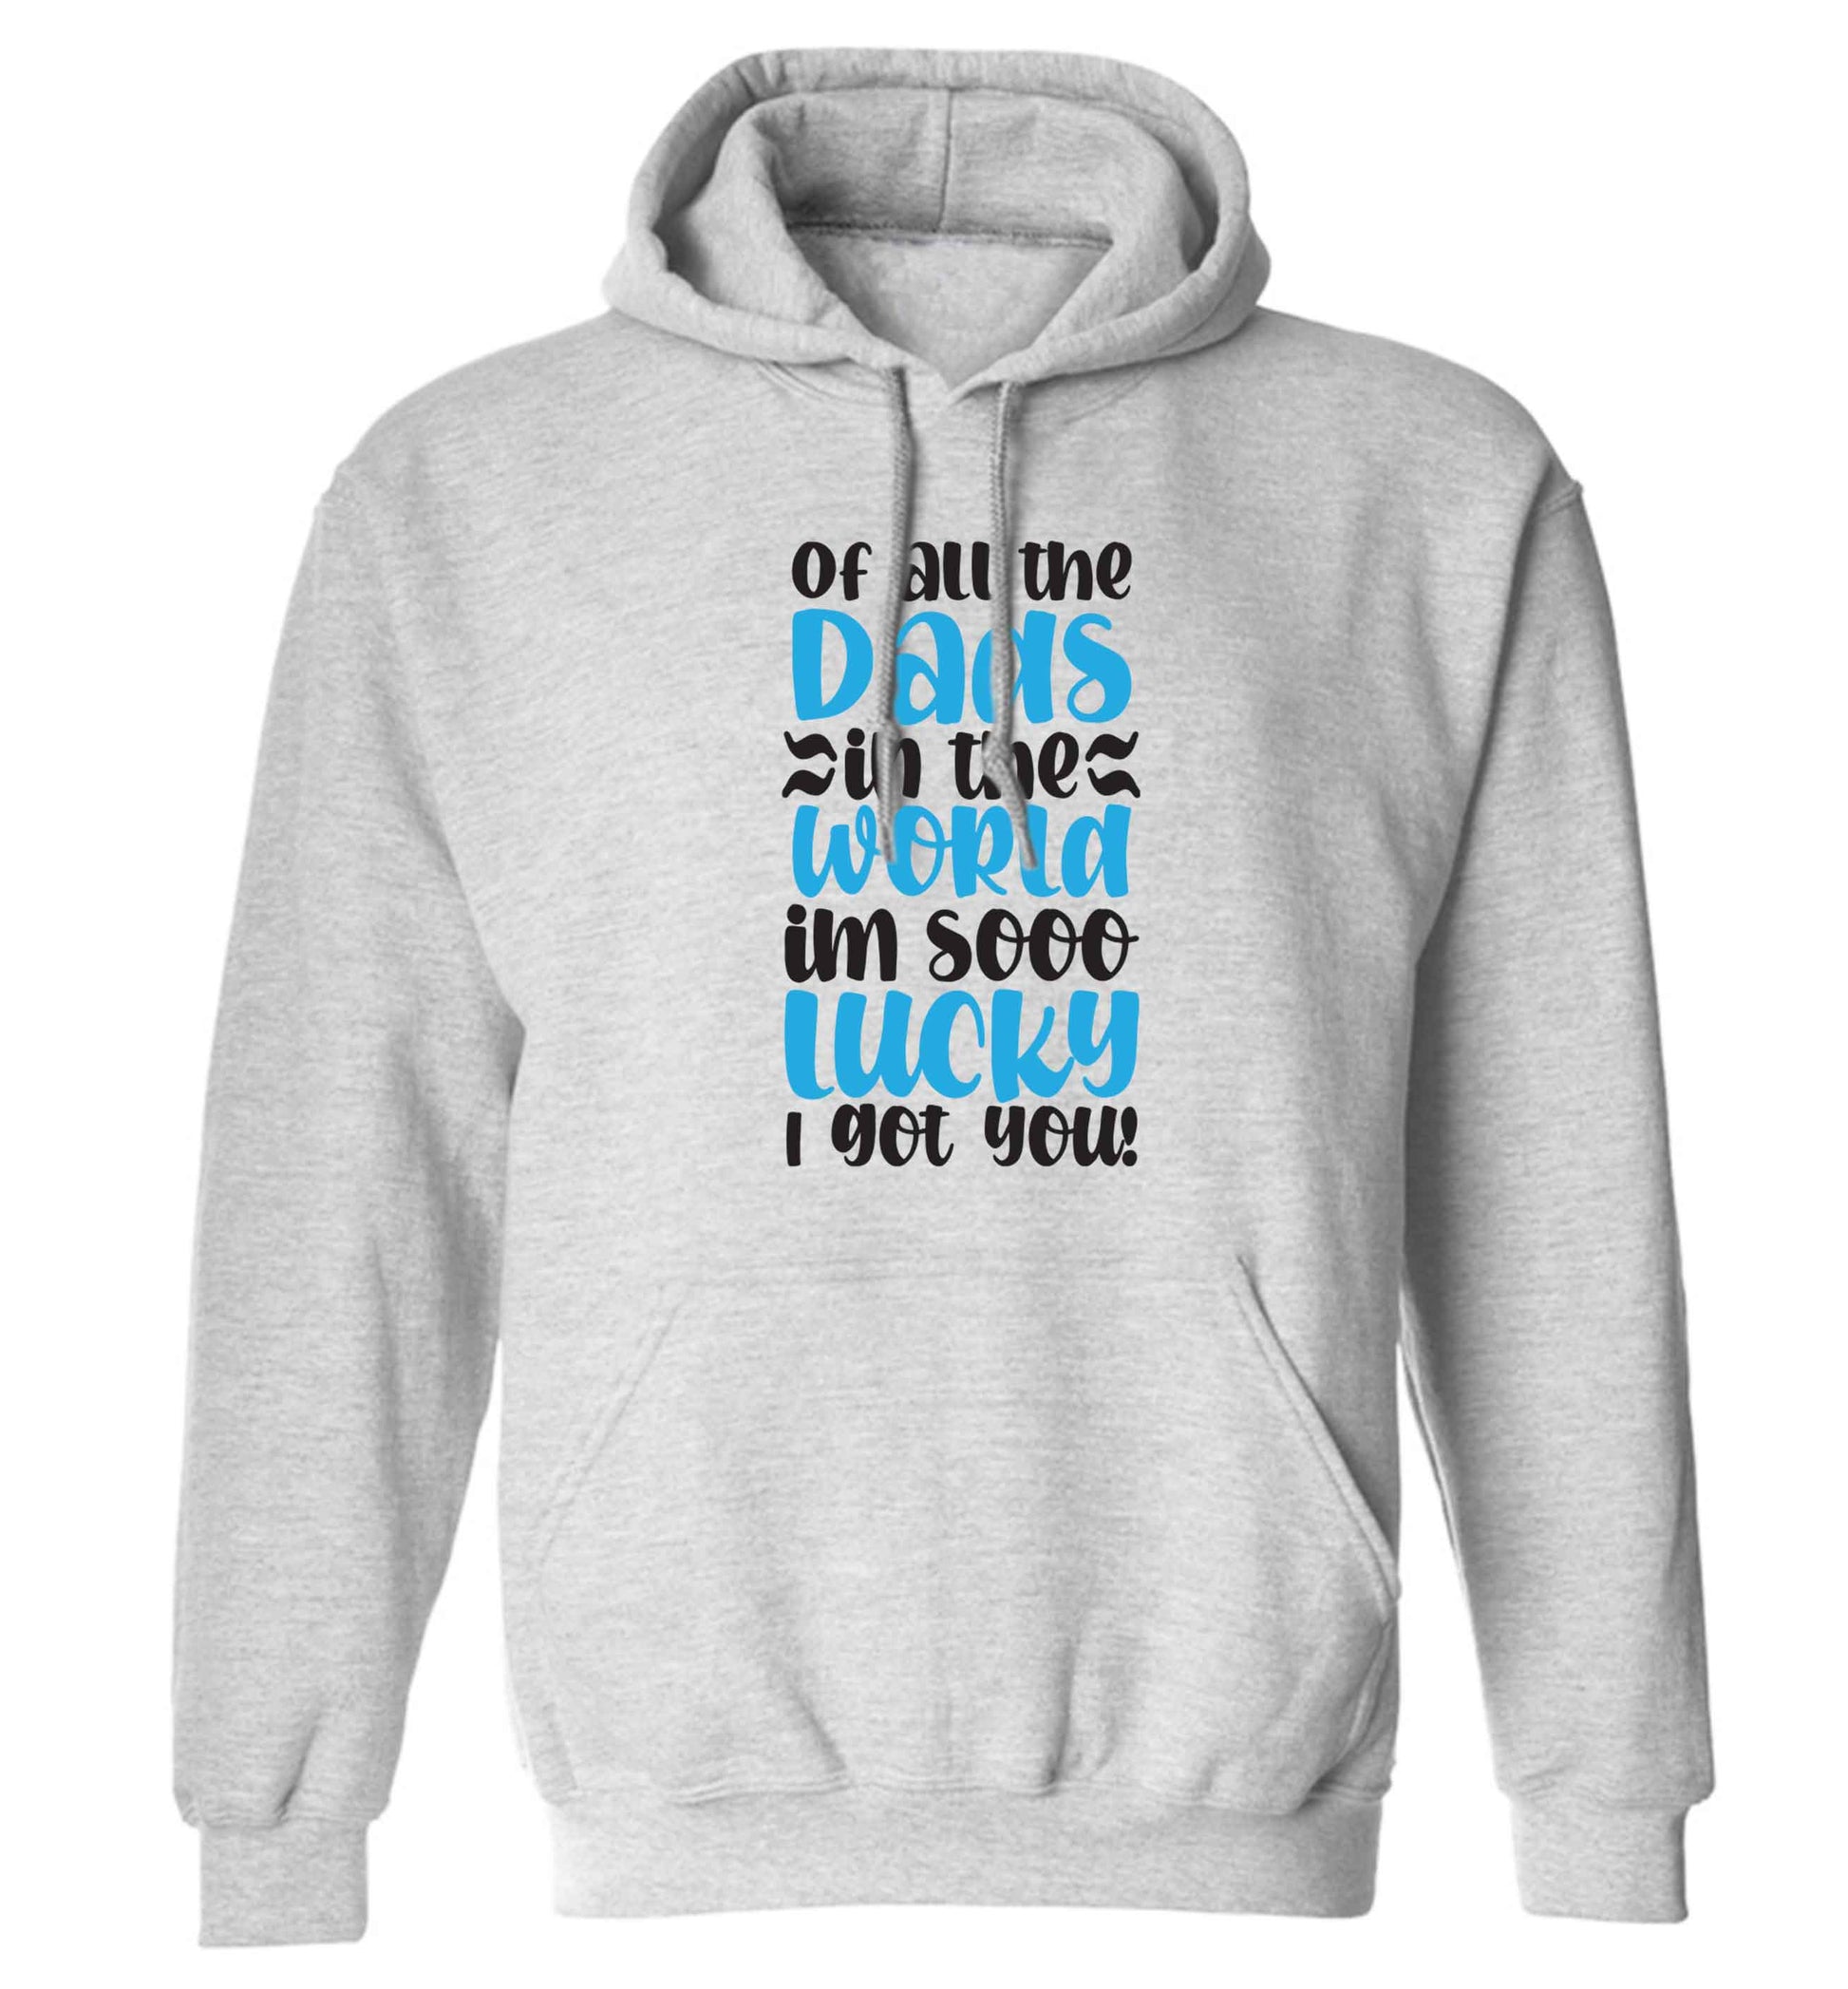 Of all the Dads in the world I'm so lucky I got you adults unisex grey hoodie 2XL